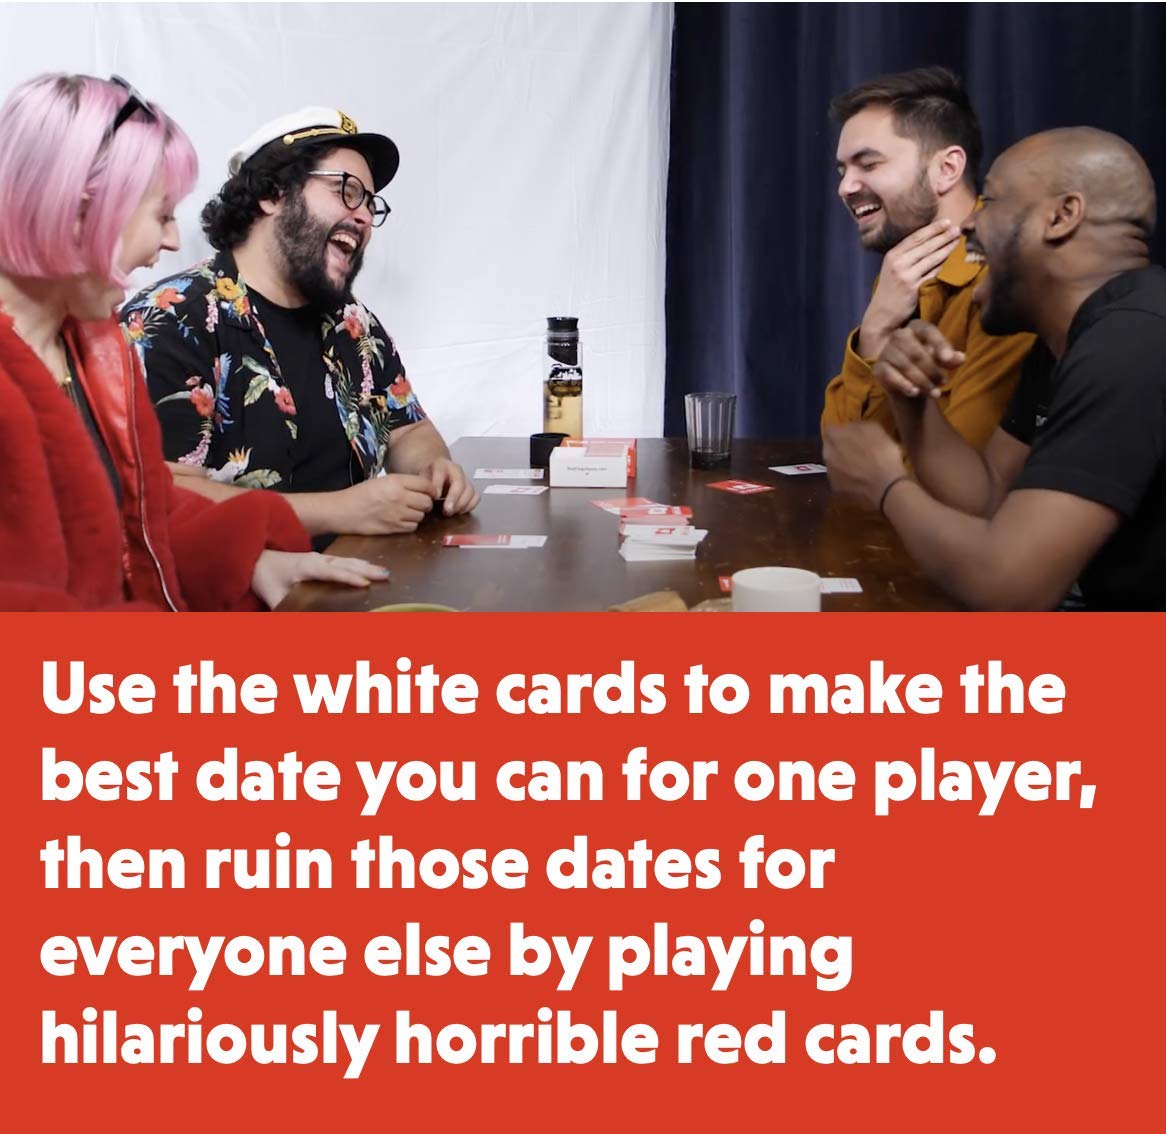 Red Flags: The Game of Terrible Dates | Funny Card Game / Party Game for Adults, 3-10 Players | by Jack Dire, Creator of Superfight